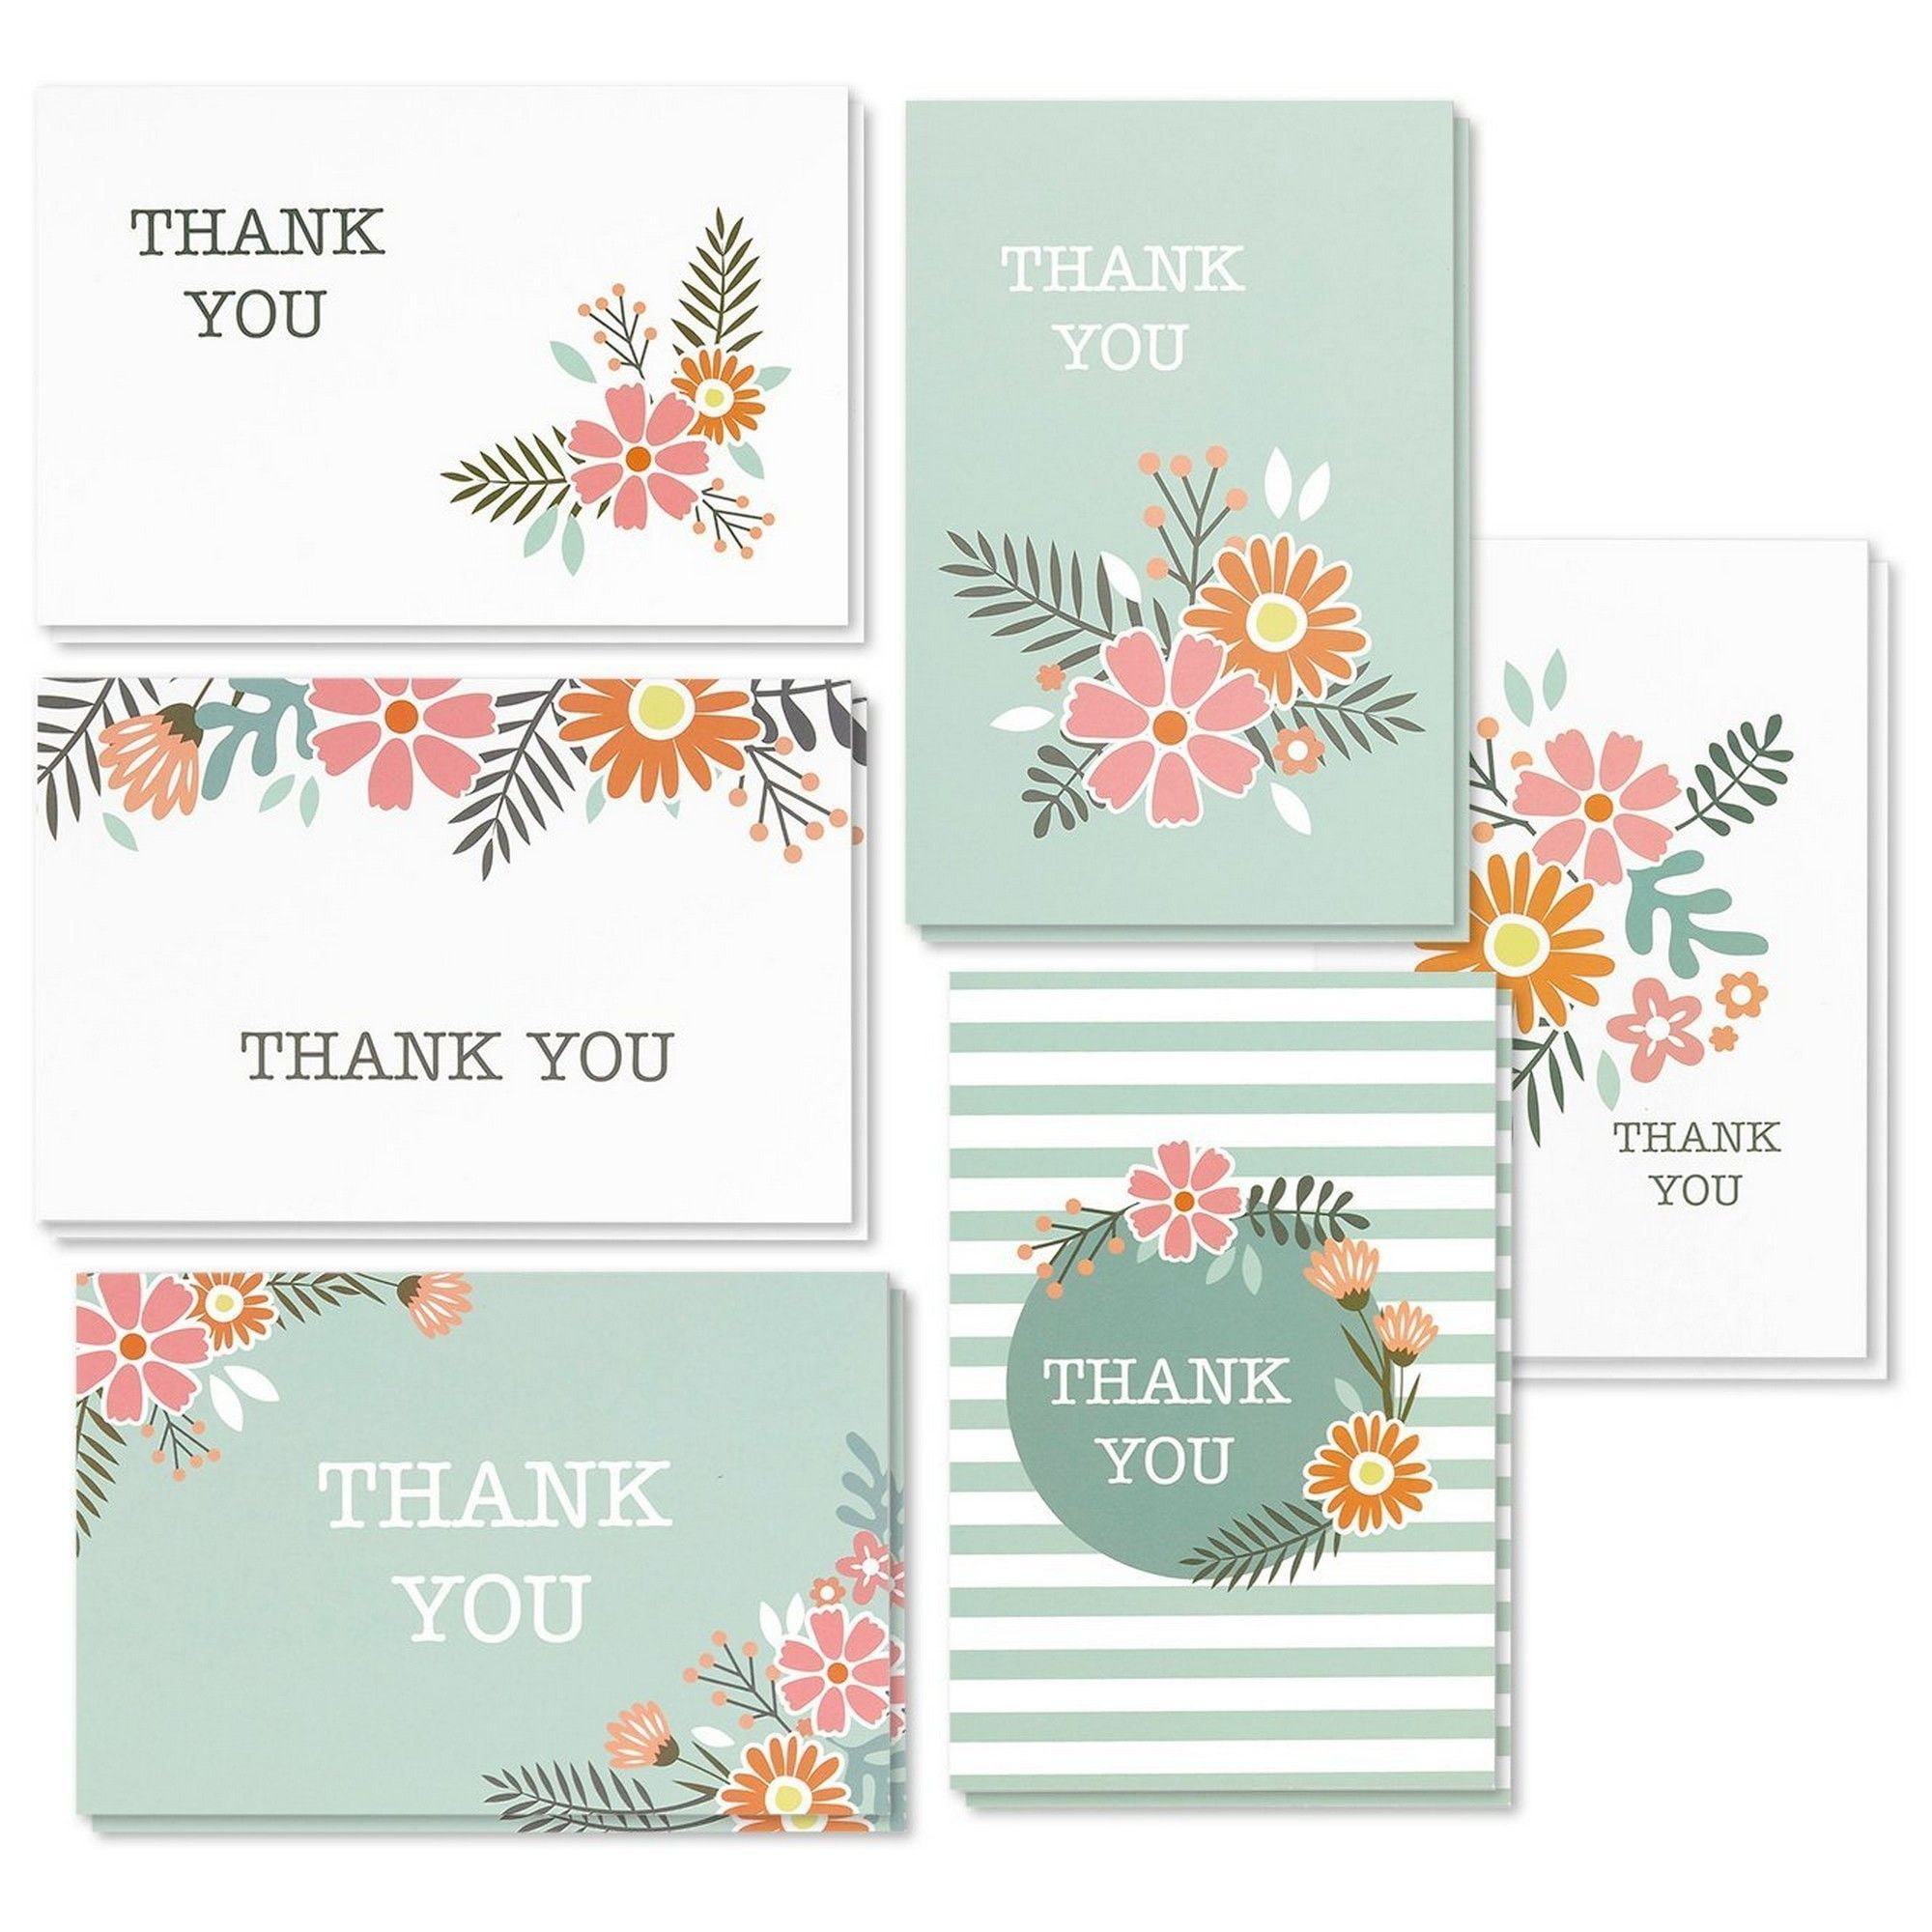 for Birthday 4x6 Thank You Cards 20 Pack Brown Craft Paper 4 Designs of Assorted Blank Thank You Greeting Cards with Envelopes Wedding Bridal/Baby Shower Celebrations